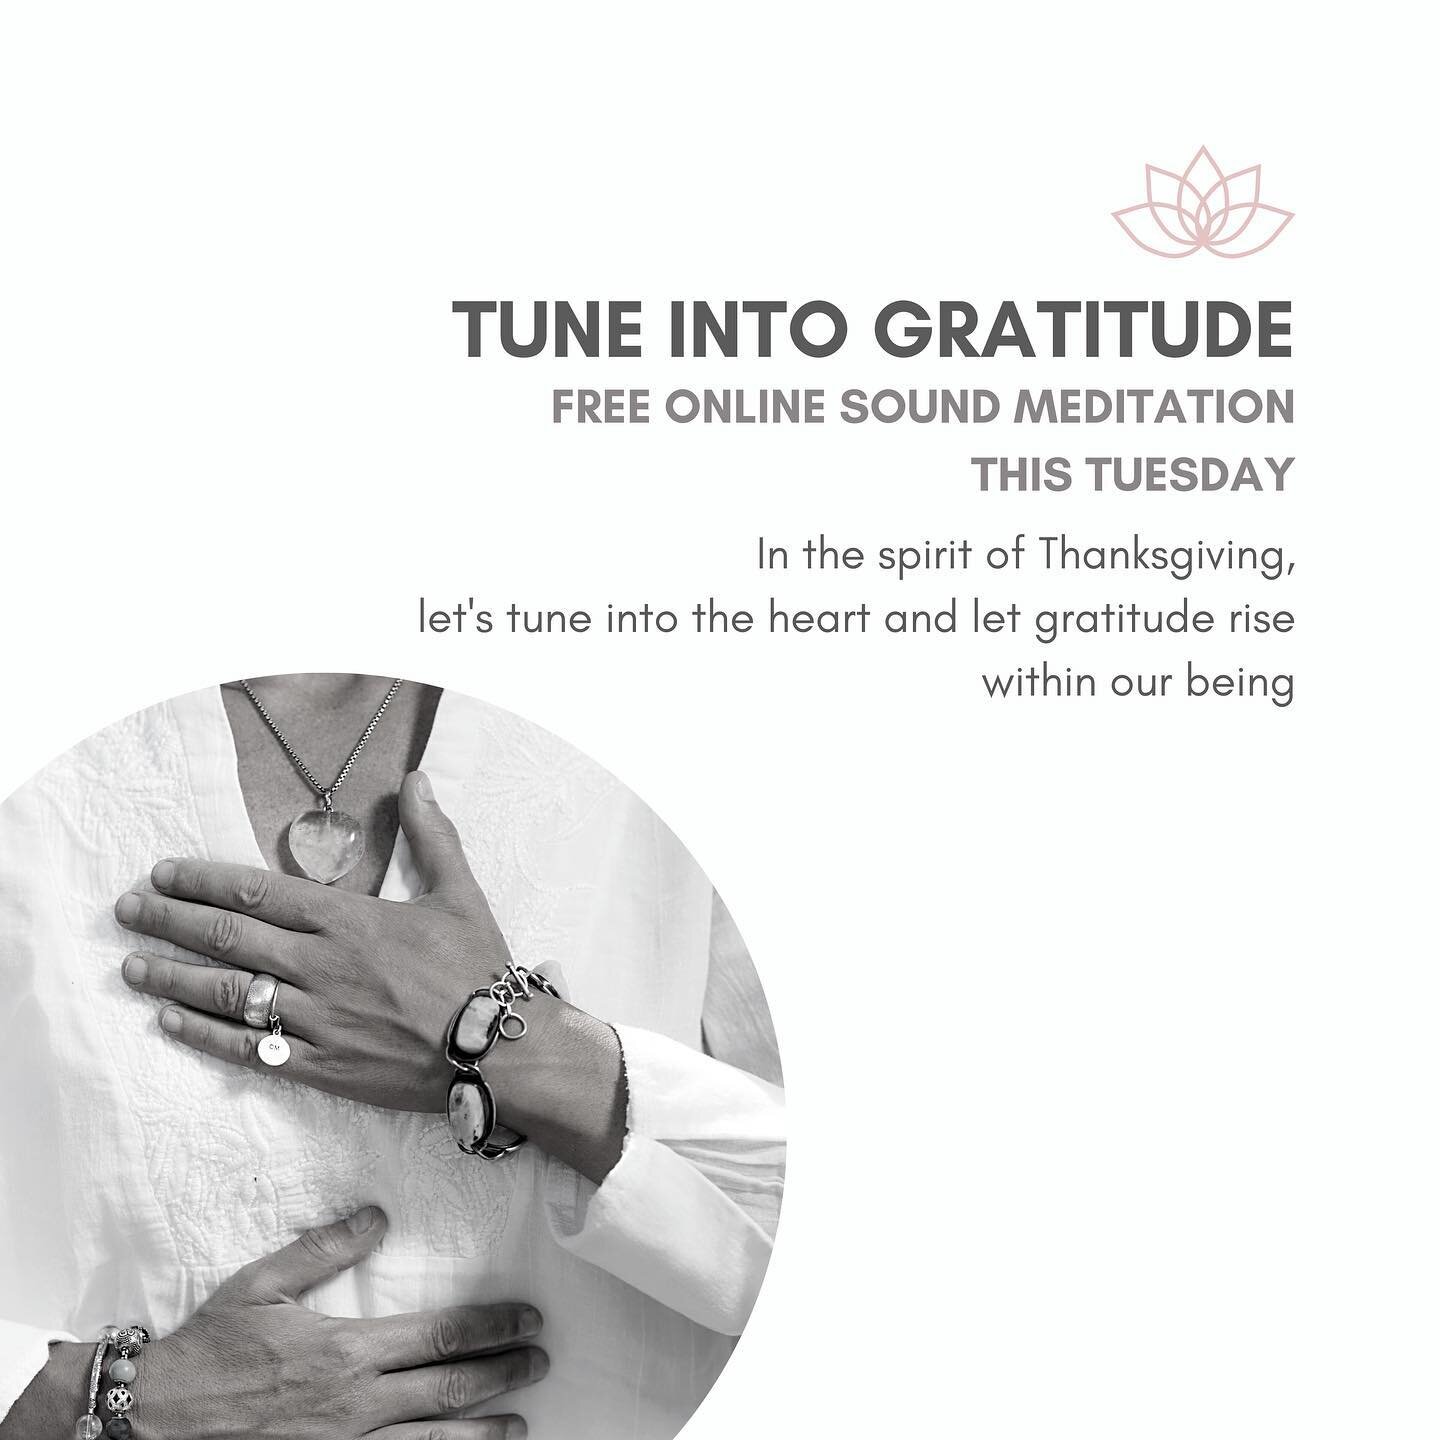 It&rsquo;s one thing to SAY we are grateful, it&rsquo;s another thing to BE it! Tune in with me this Tuesday on Zoom for a free gratitude sound meditation in the spirit of Thanksgiving! Register for FREE in the link in my bio!
&bull;
&bull;
&bull;
#f